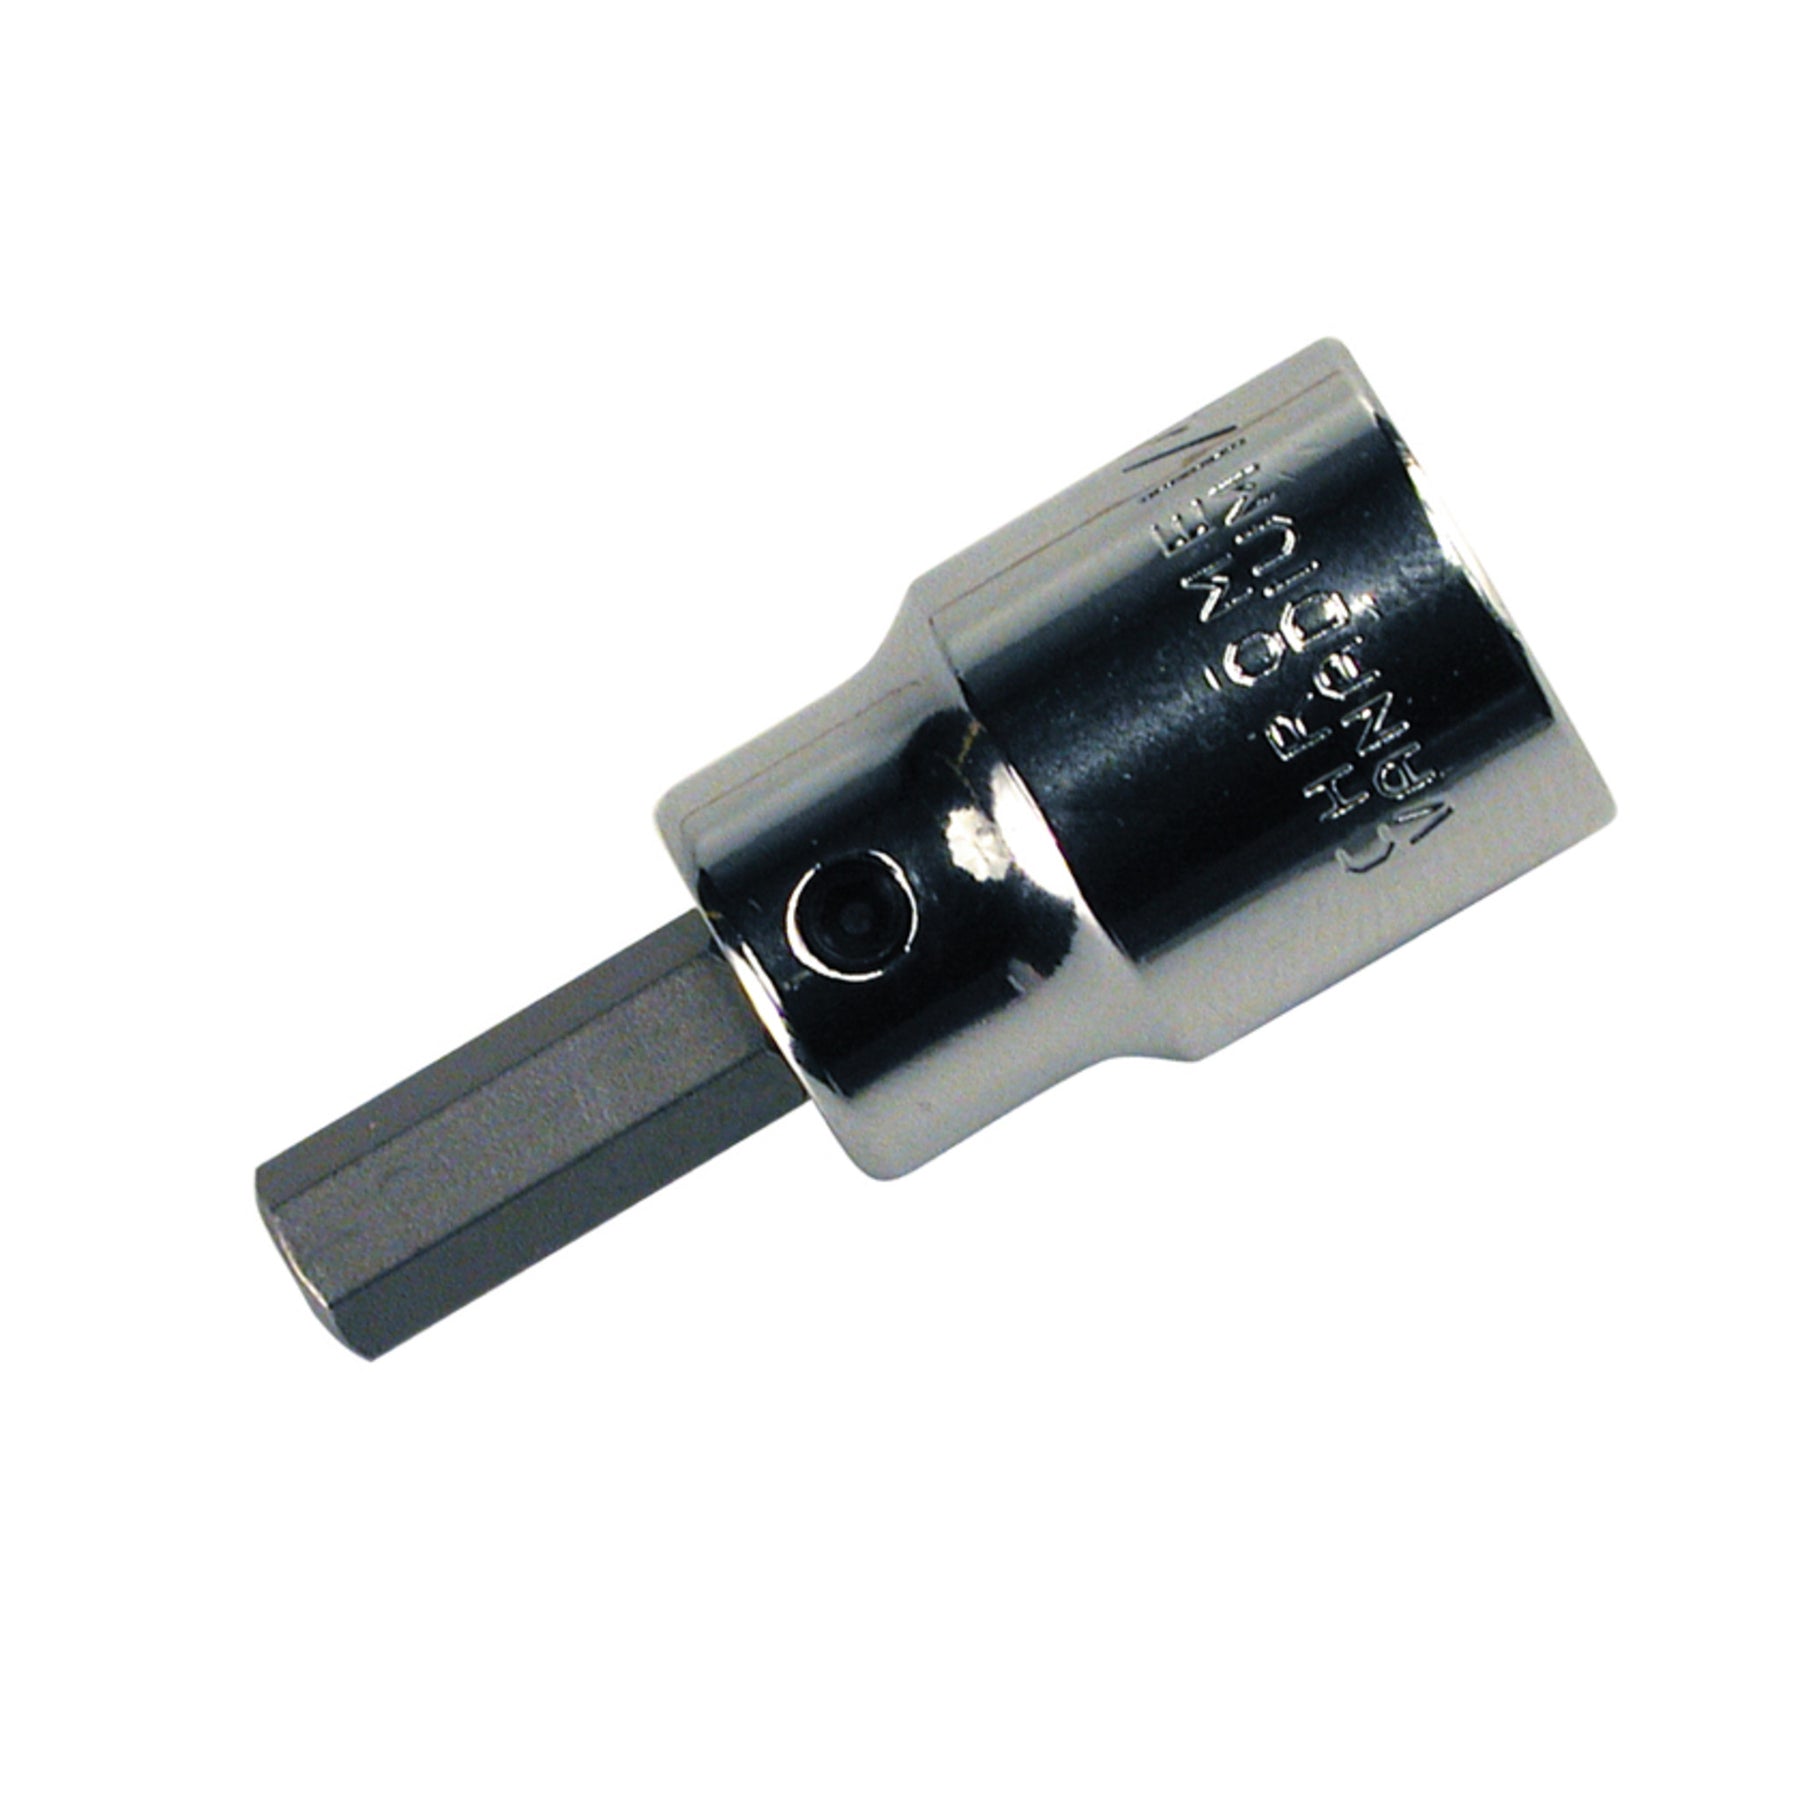 Security Hex BitSocket 3/8" Drive 3/16"